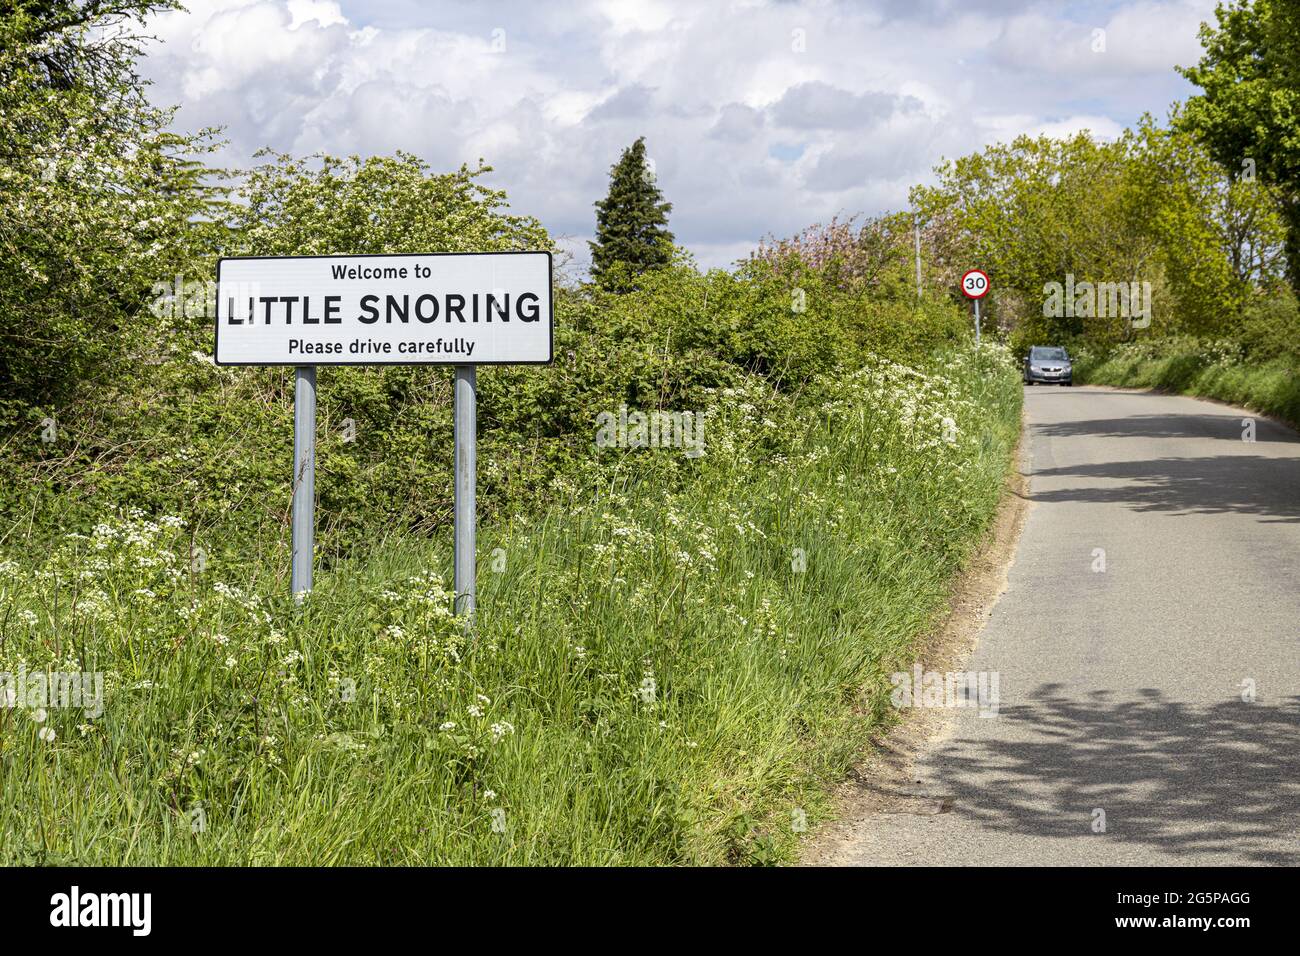 A road sign welcoming people to the village of Little Snoring, Norfolk UK Stock Photo